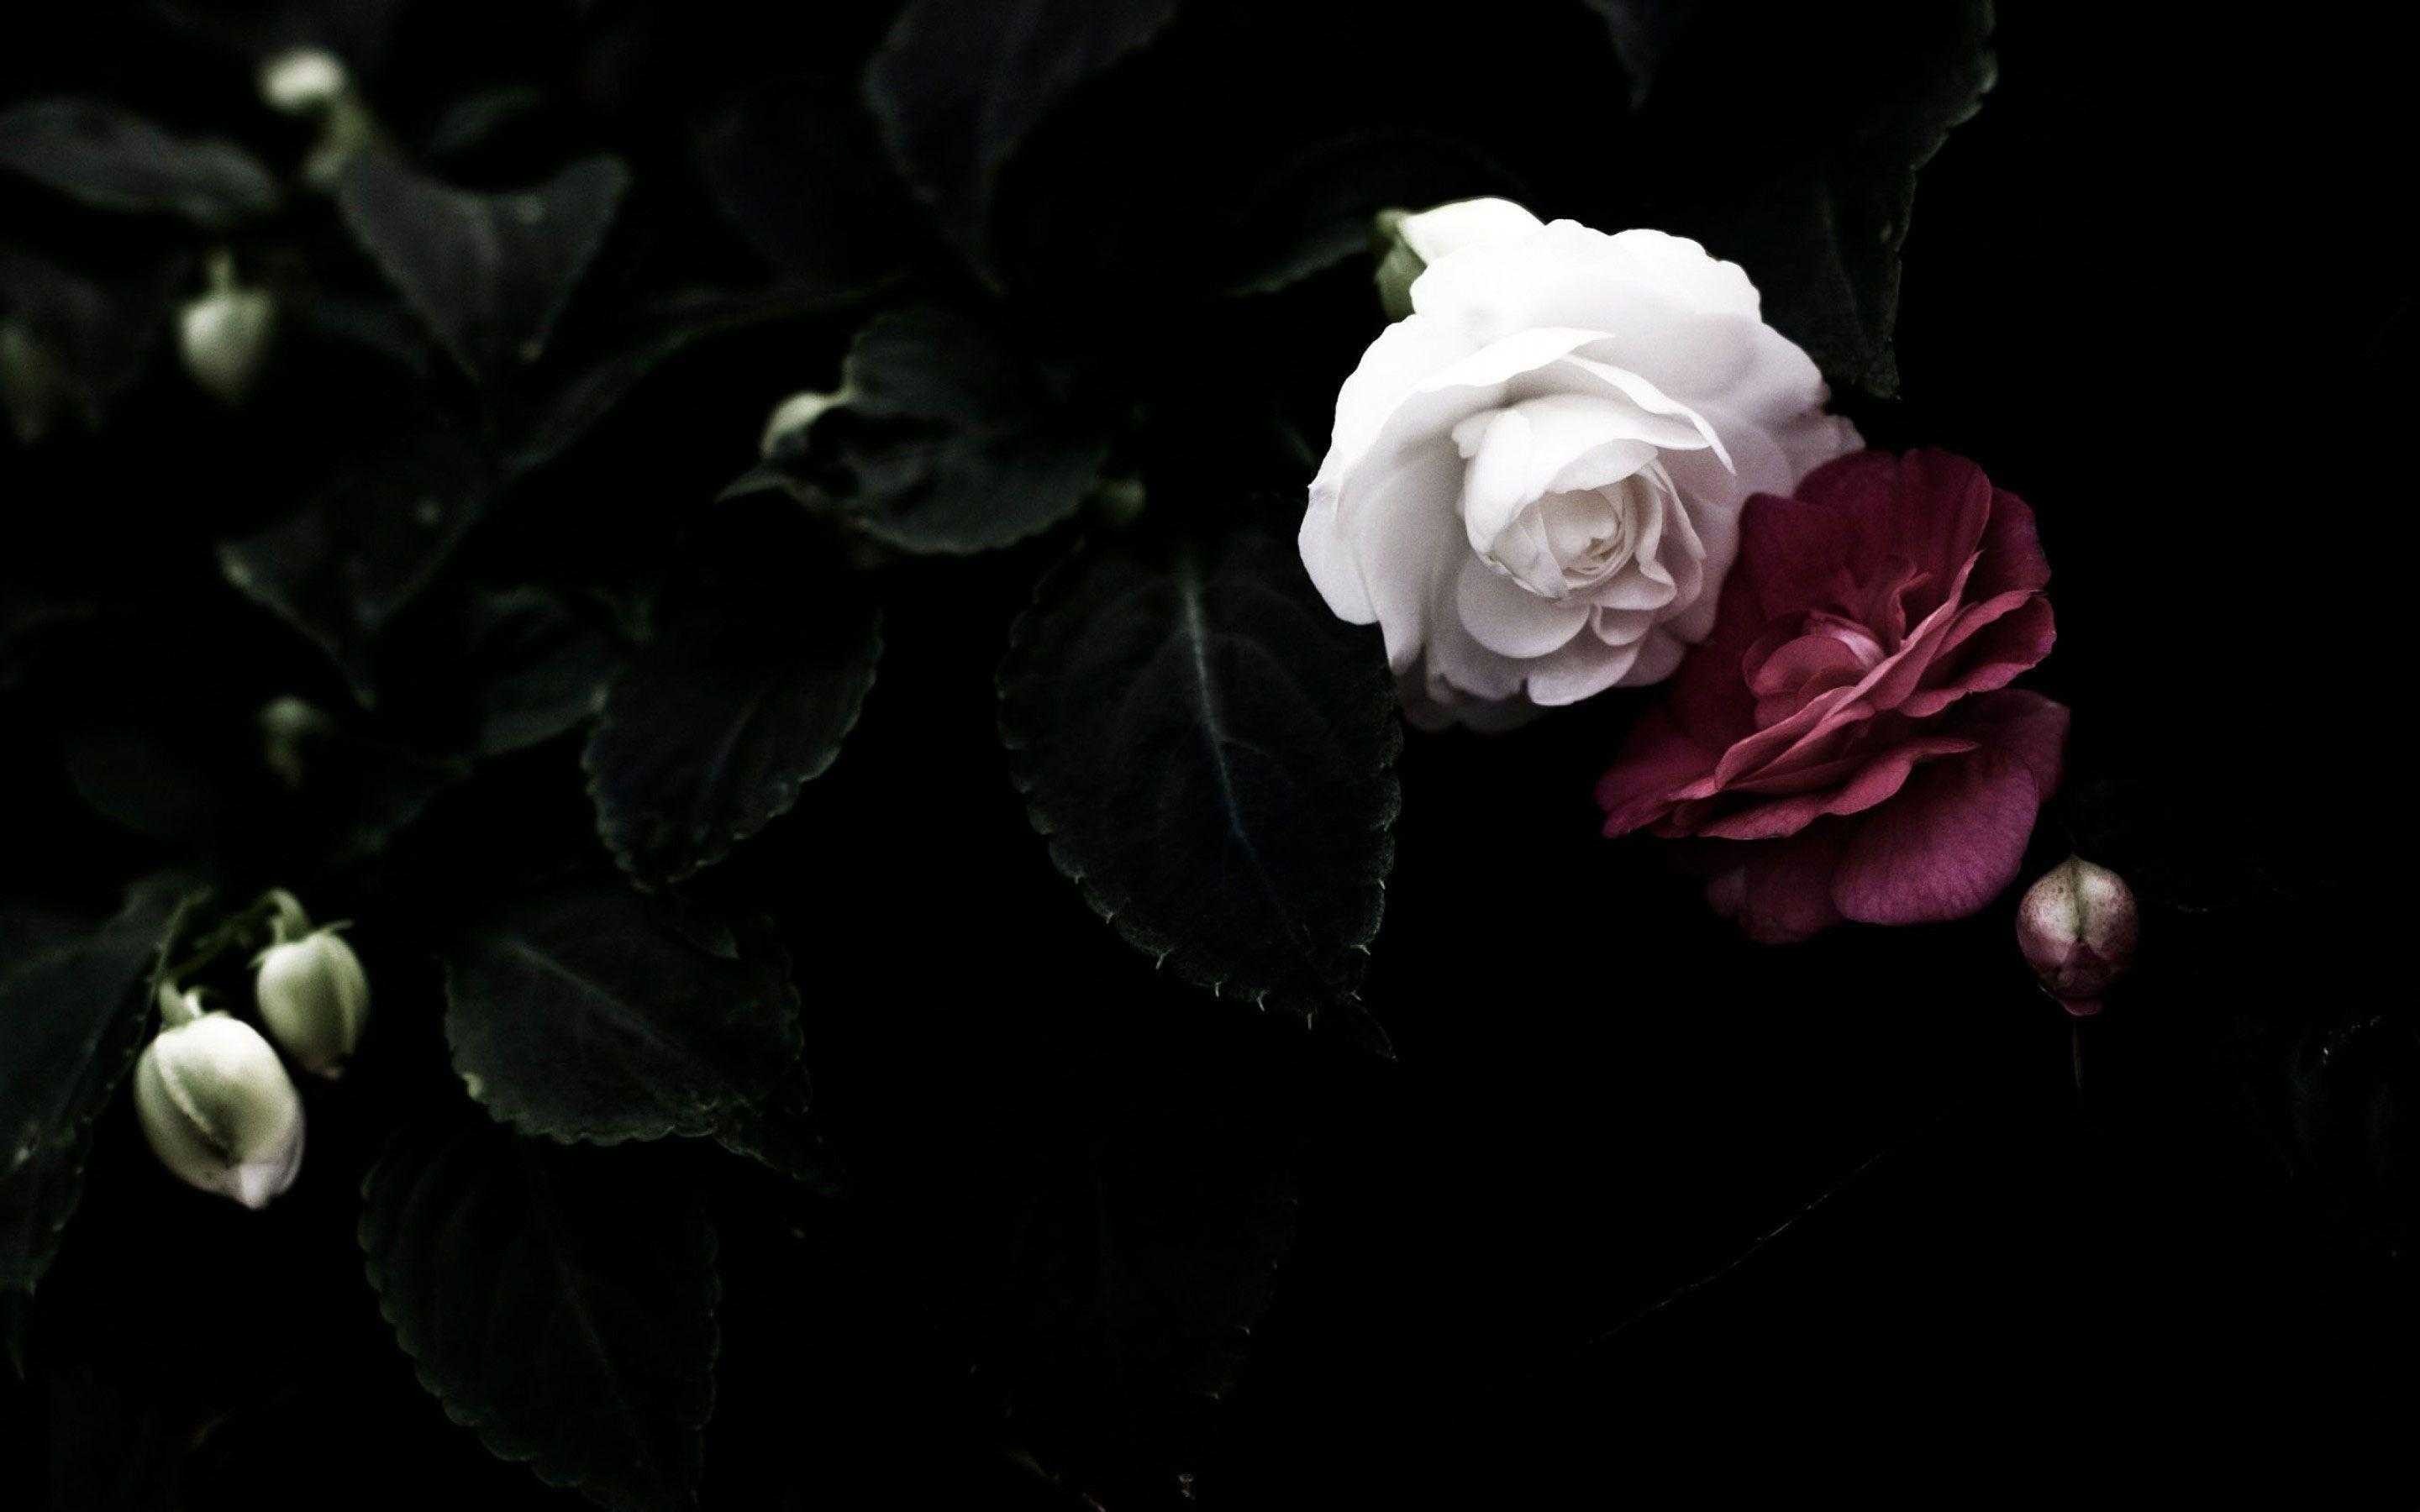 Two roses, one white and one pink, are shown in a dark setting. - Black rose, roses